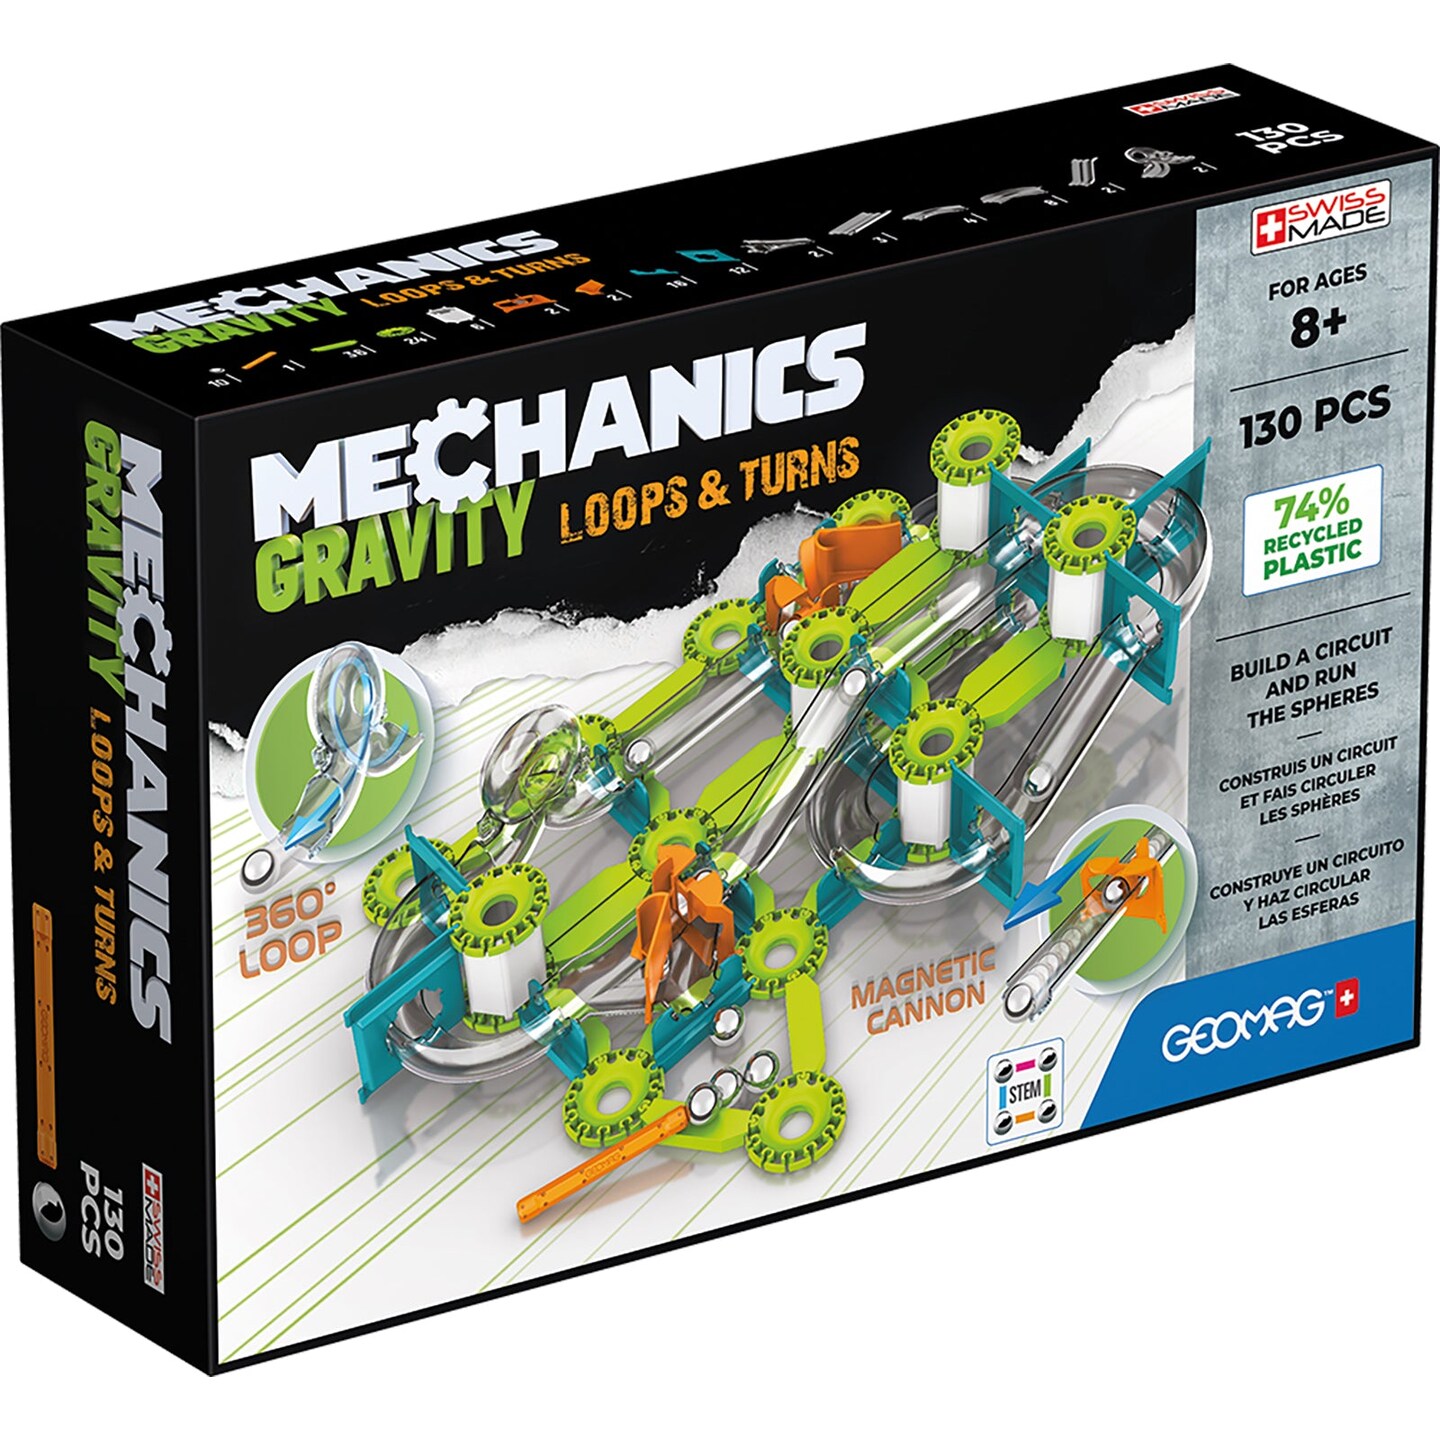 Mechanics Gravity Loops &#x26; Turns Recycled, 130 Pieces